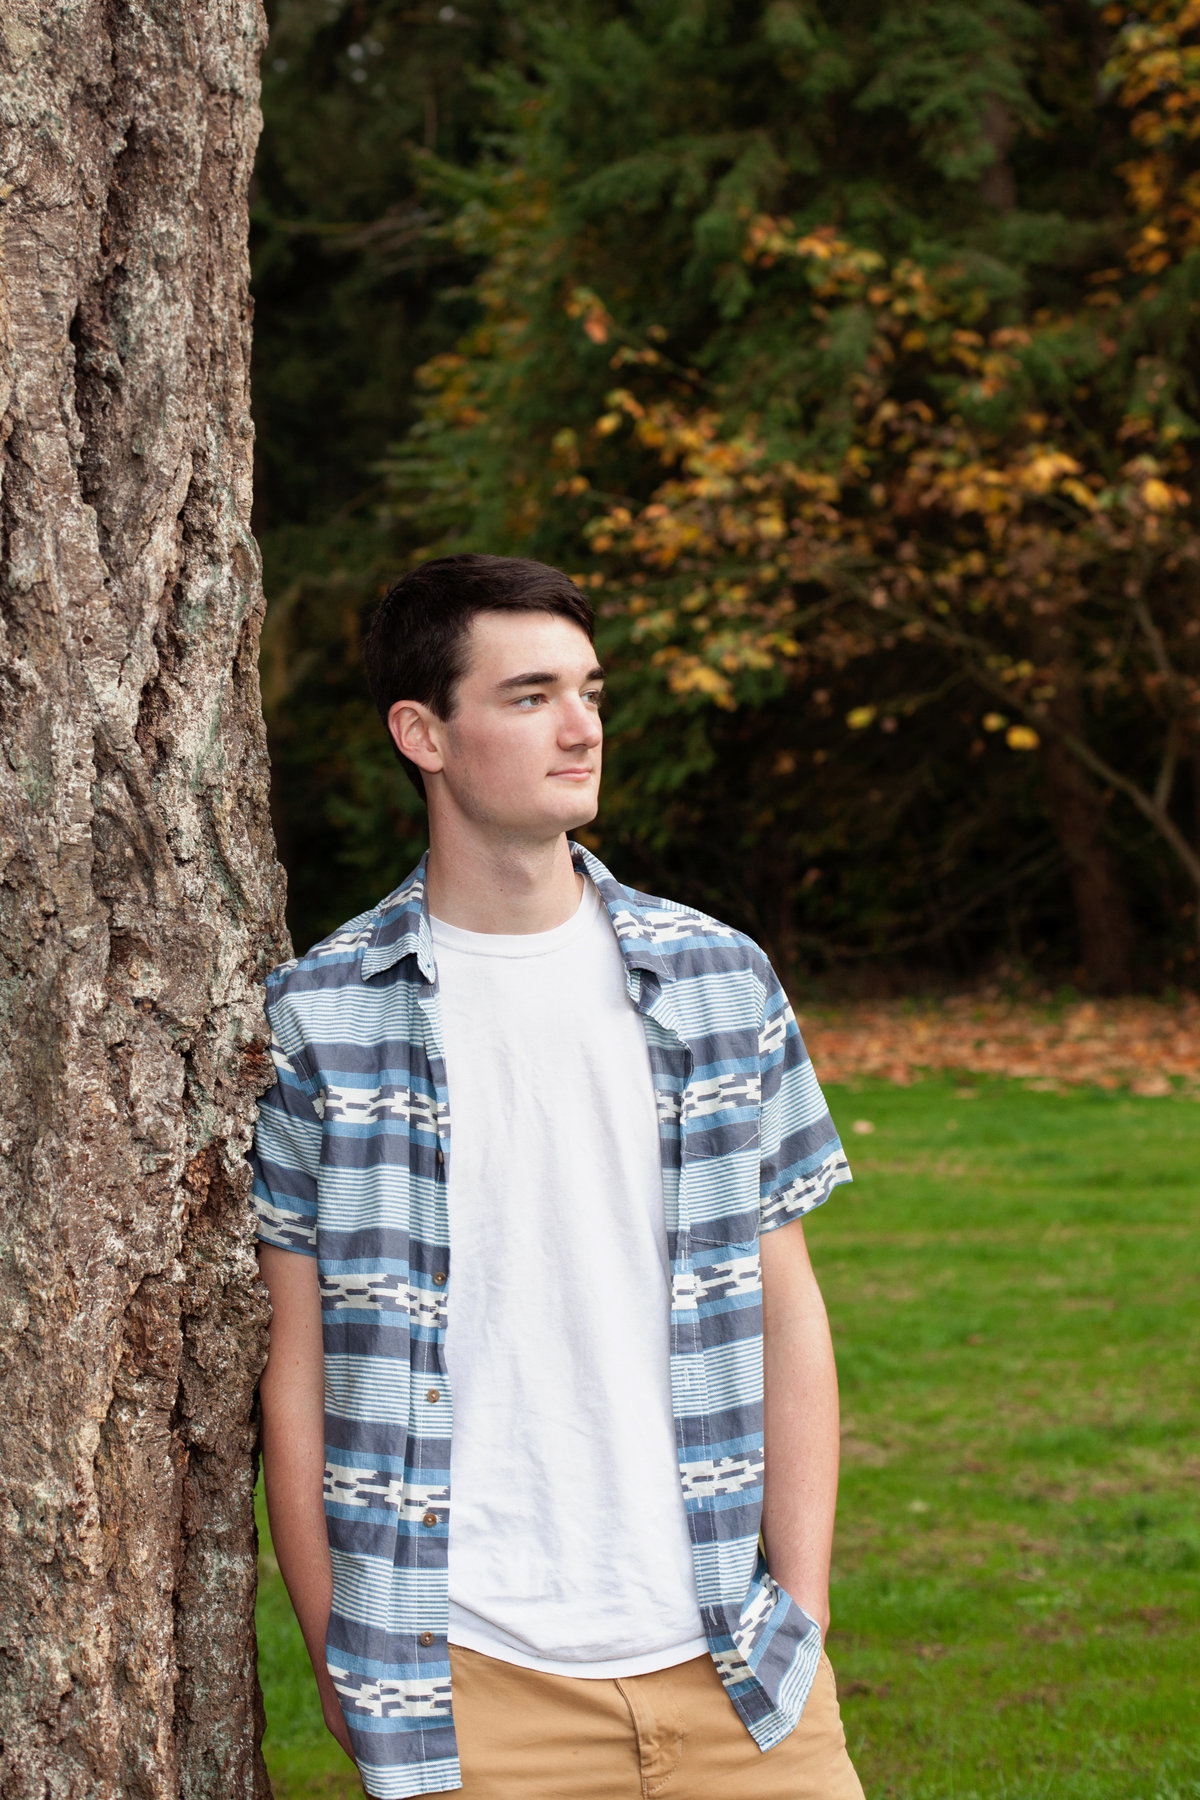 Sammamish high school senior photo session  outside early fall